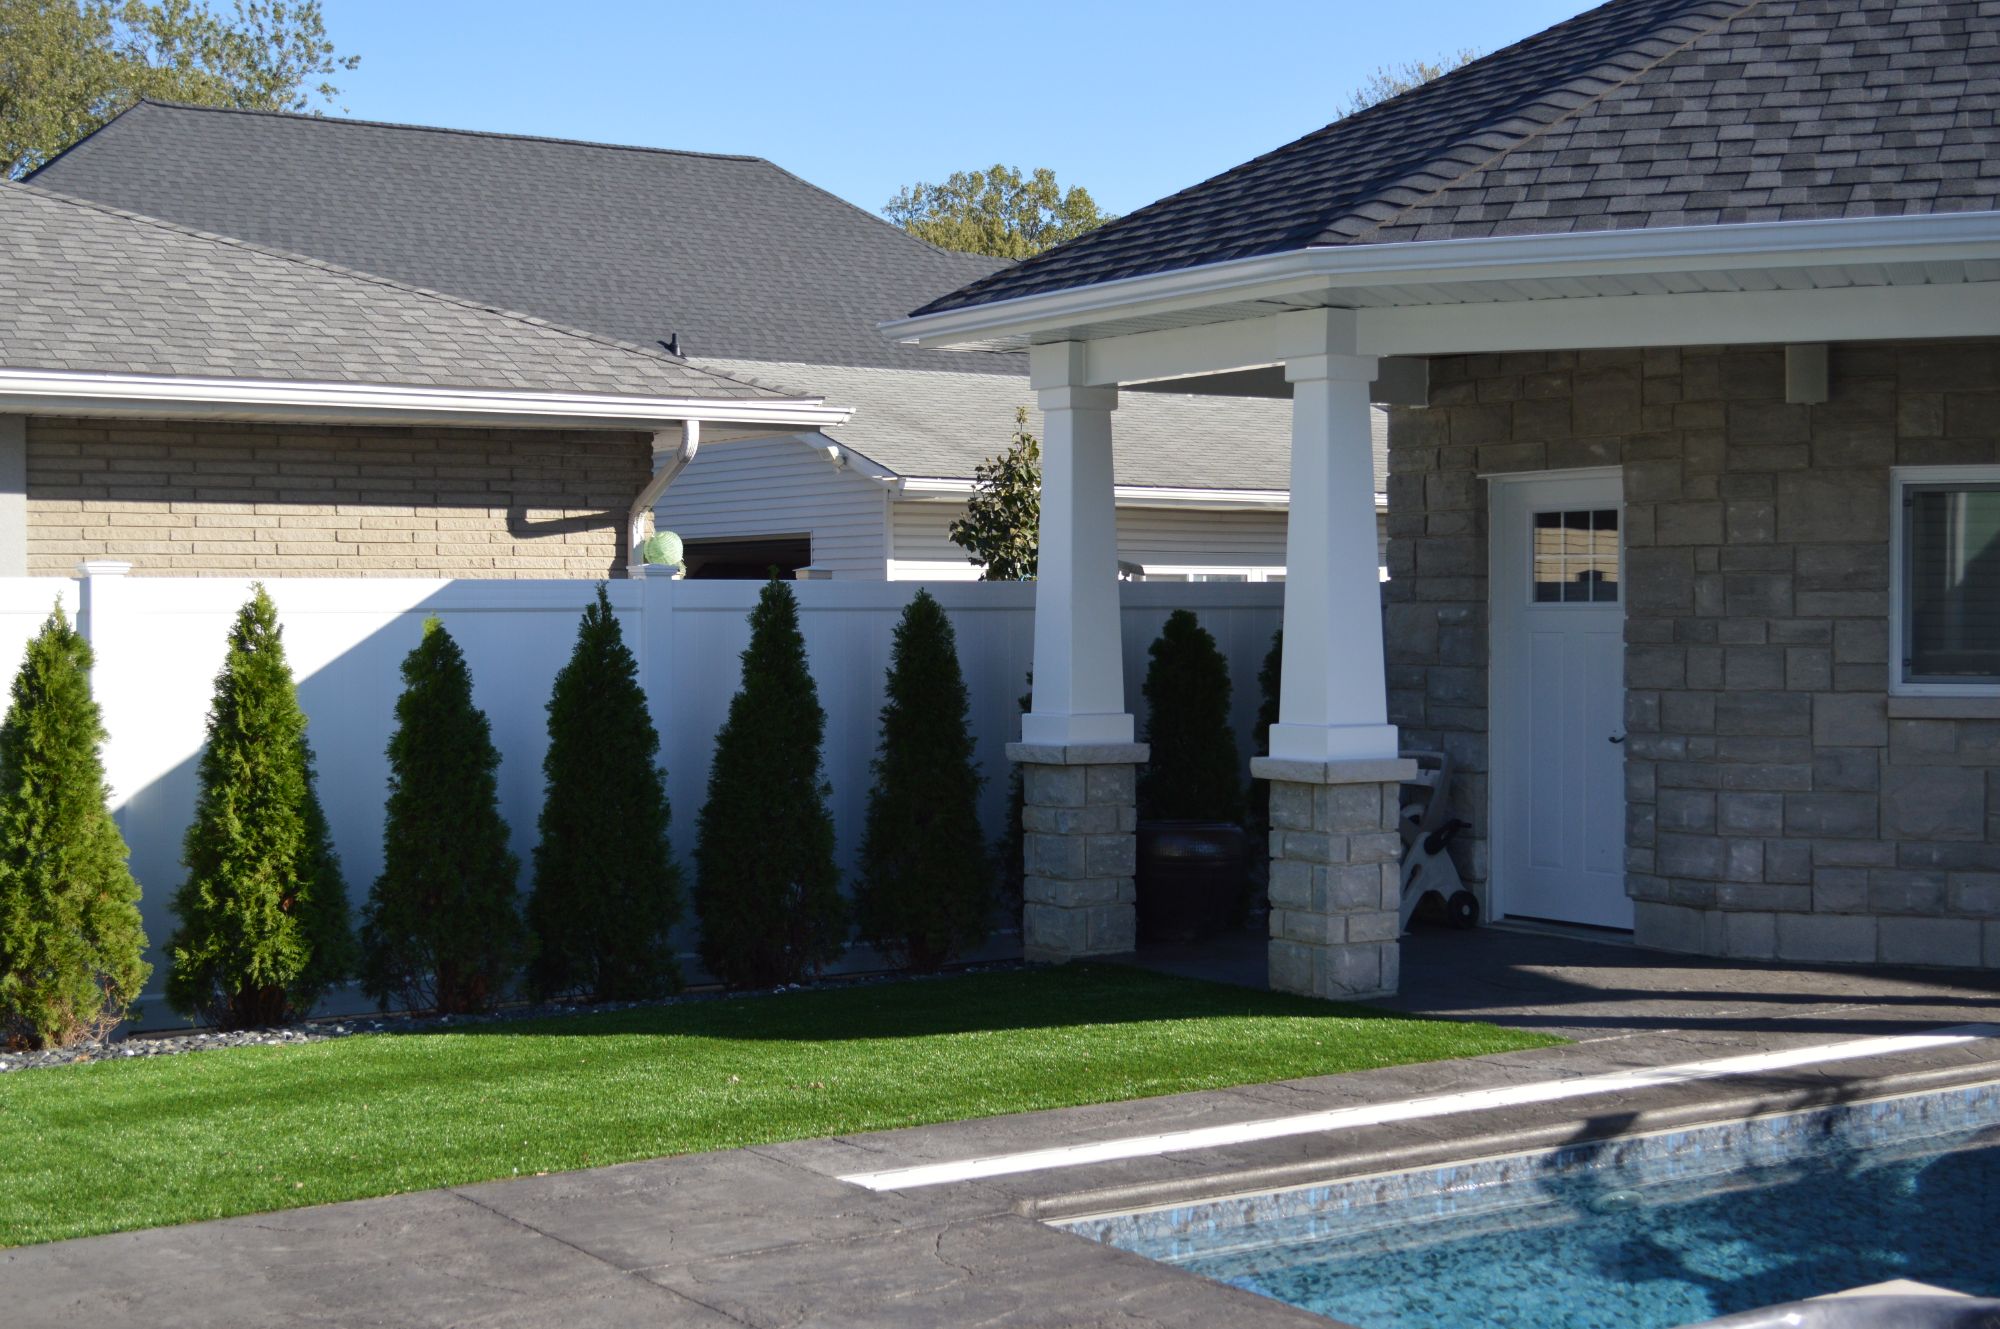 White PVC fence with a 1.5 inch x 5.5 inch nexus rail to give you perfect privacy while you swim in your pool. We install many PVC fences and would be happy to install another one of these in the Tecumseh area.